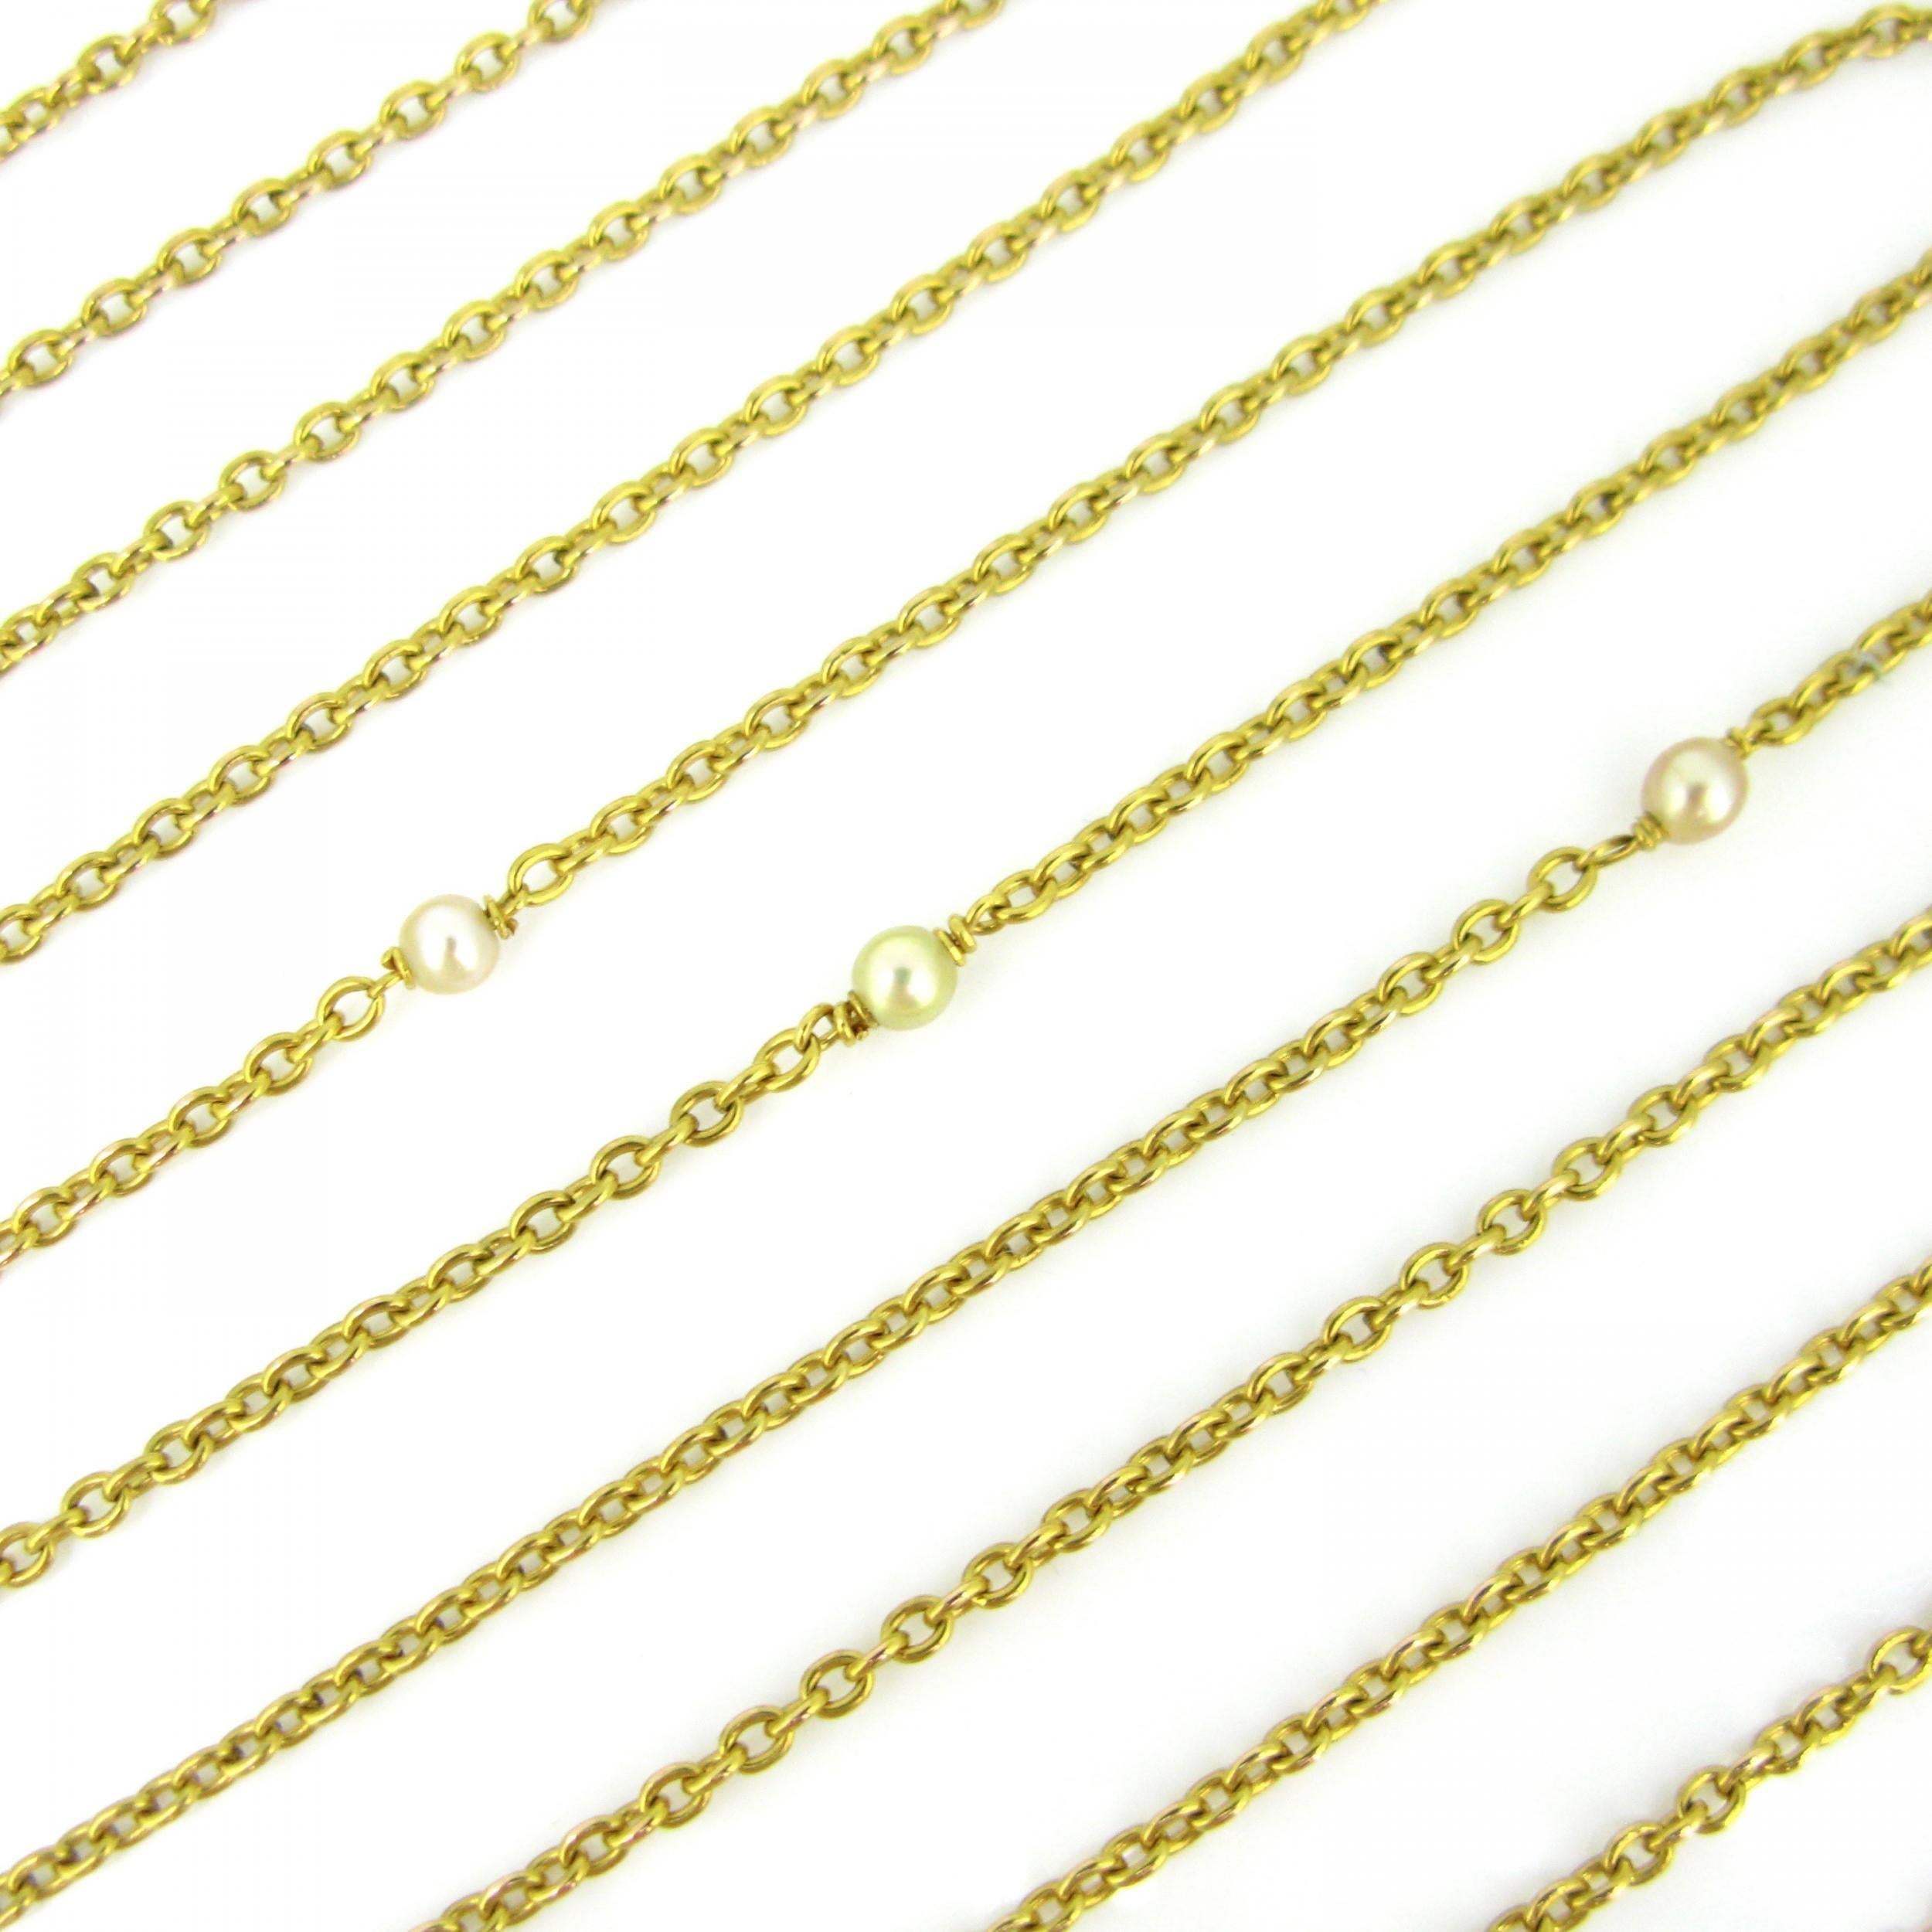 Antique Victorian Pearl Long Guard Chain, 68in, 18kt Yellow Gold, France, c.1880 4